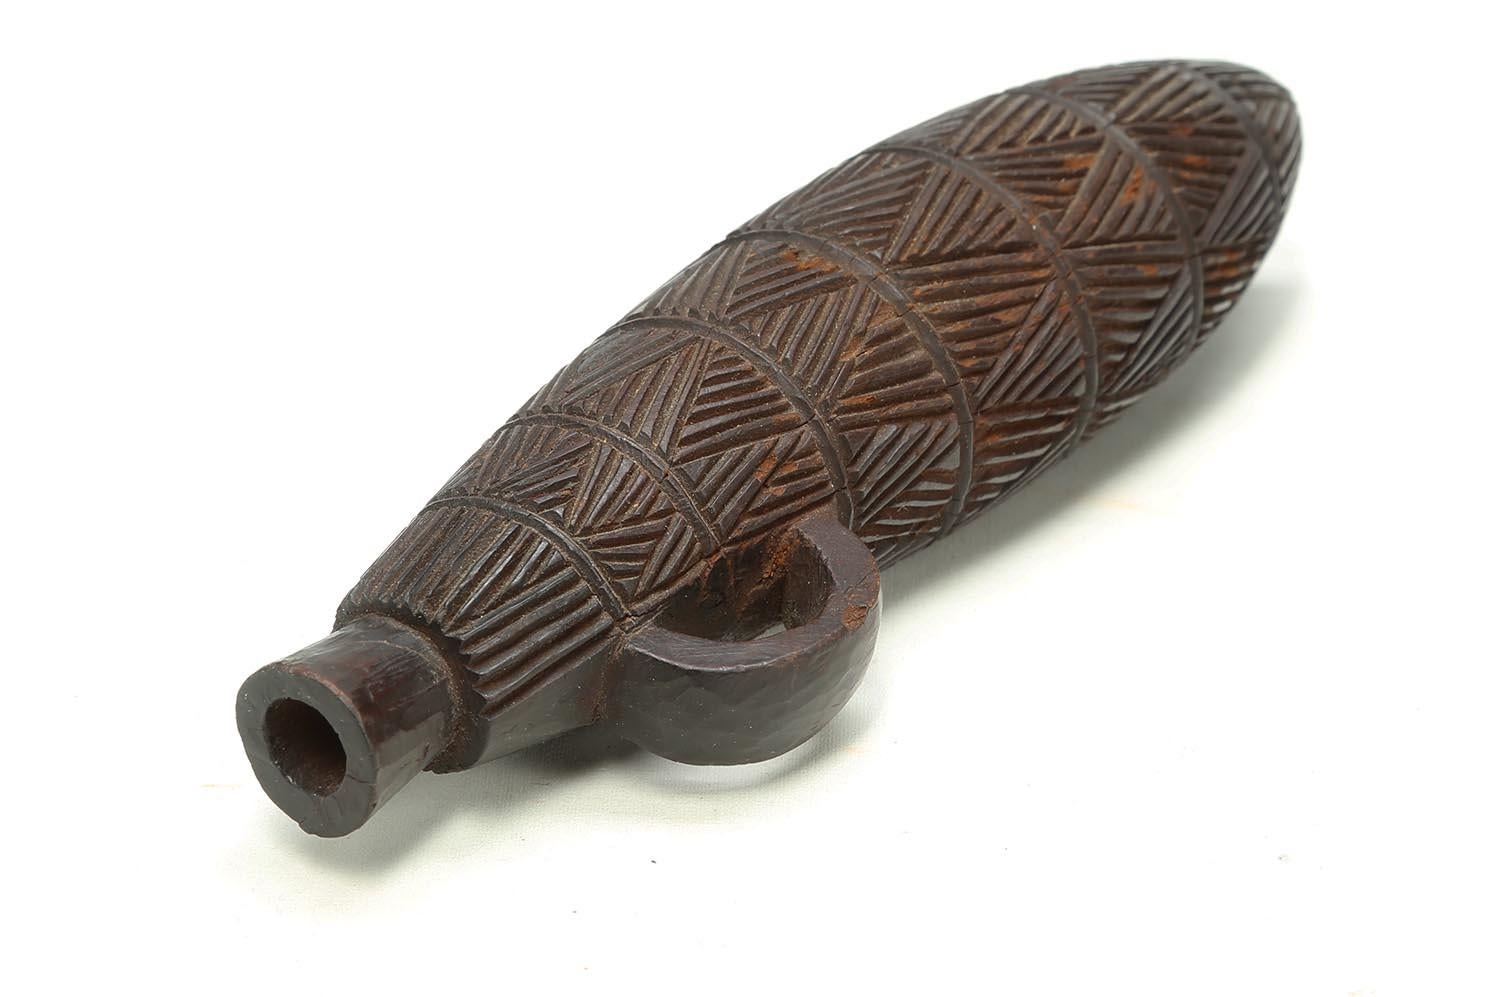 Zulu Tribal carved wood Snuff Container, South Africa

A finely carved snuff container with finely carved incised great geometric designs, a great example of the detailed work the Zulu are known for. Early 20th century, 7 inches high, in very good